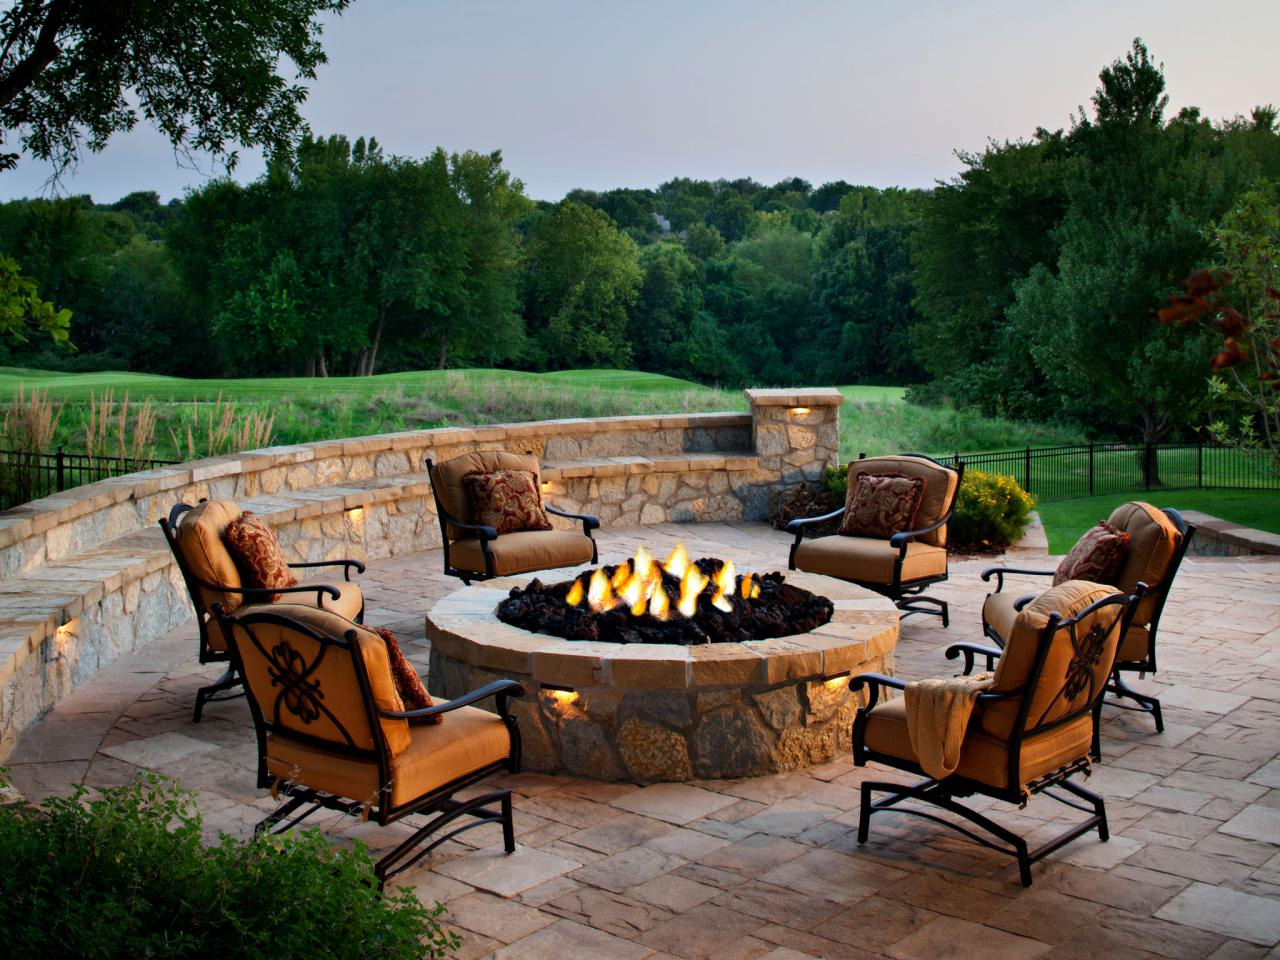 Fire Pits Expand Outdoor Living Landscape Design Cottage Grove Wi Patio Driveway Middleton Madison Wi Pond Waunakee Wi